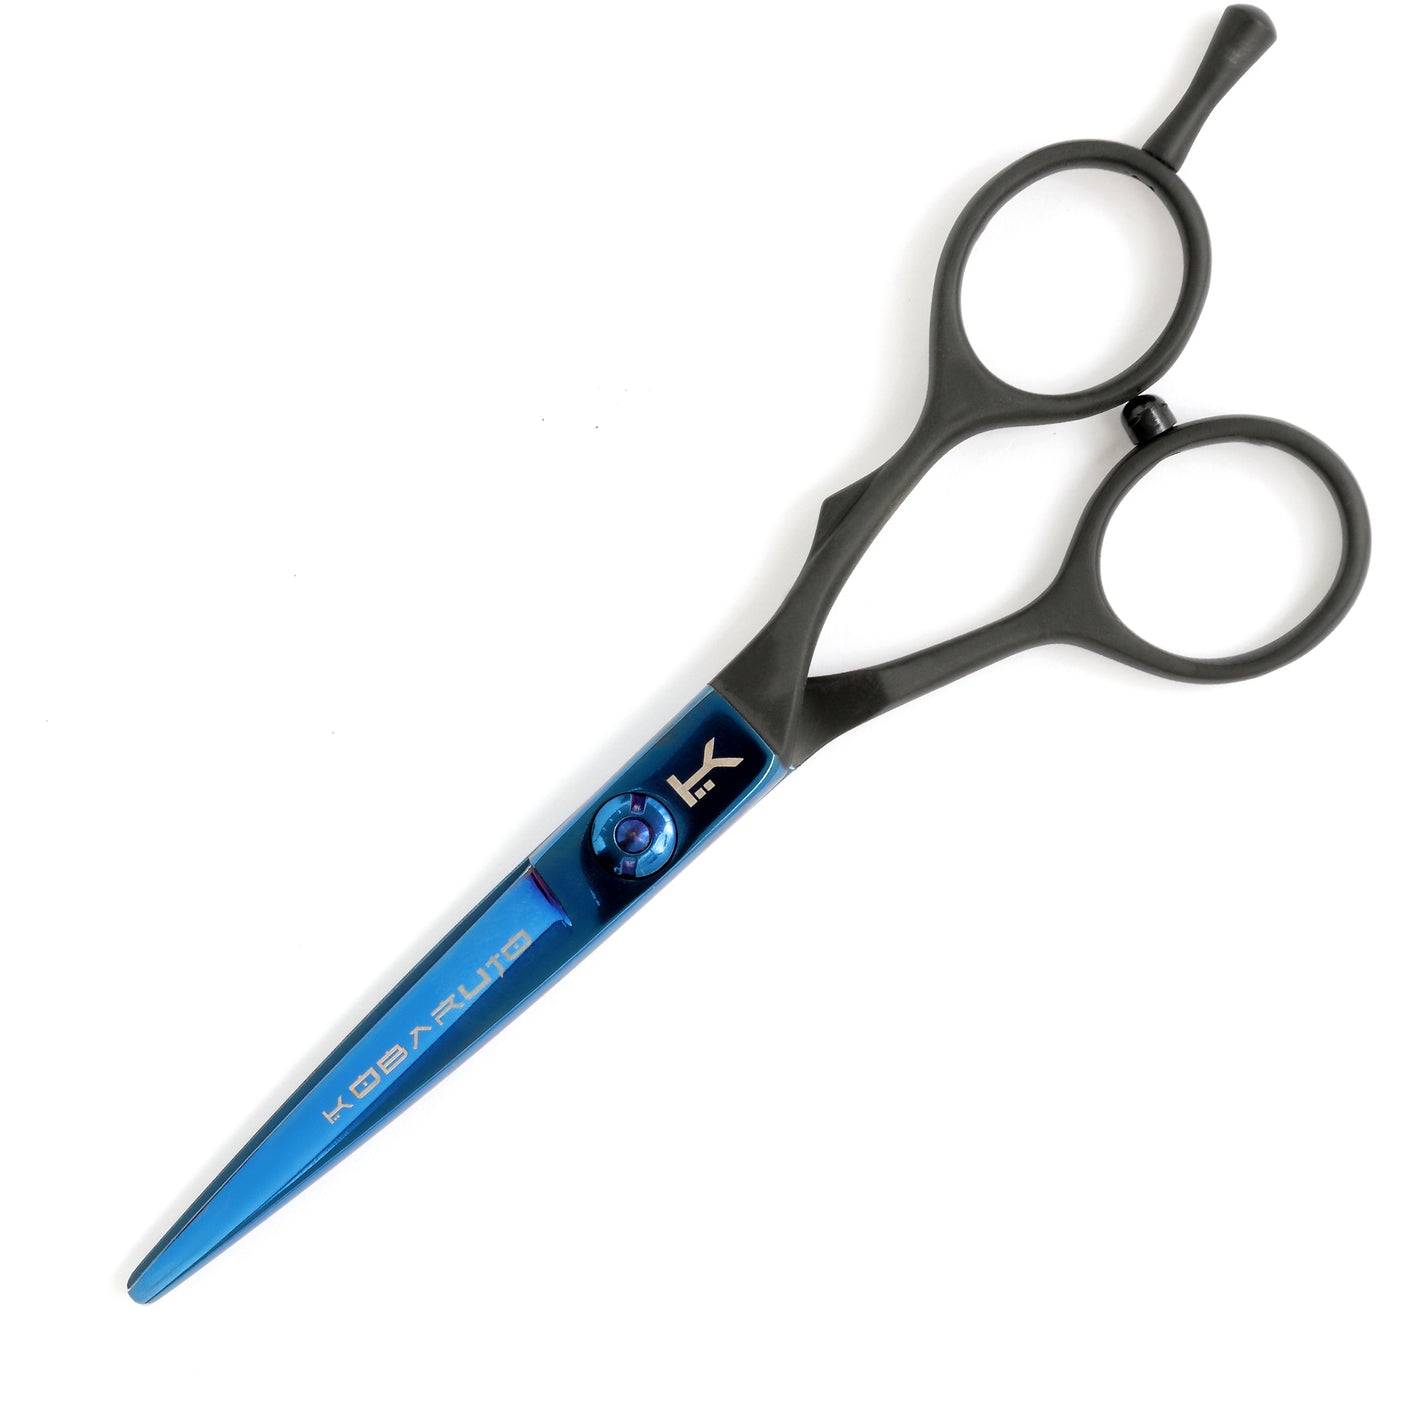 a pair of scissors sitting on top of a white surface